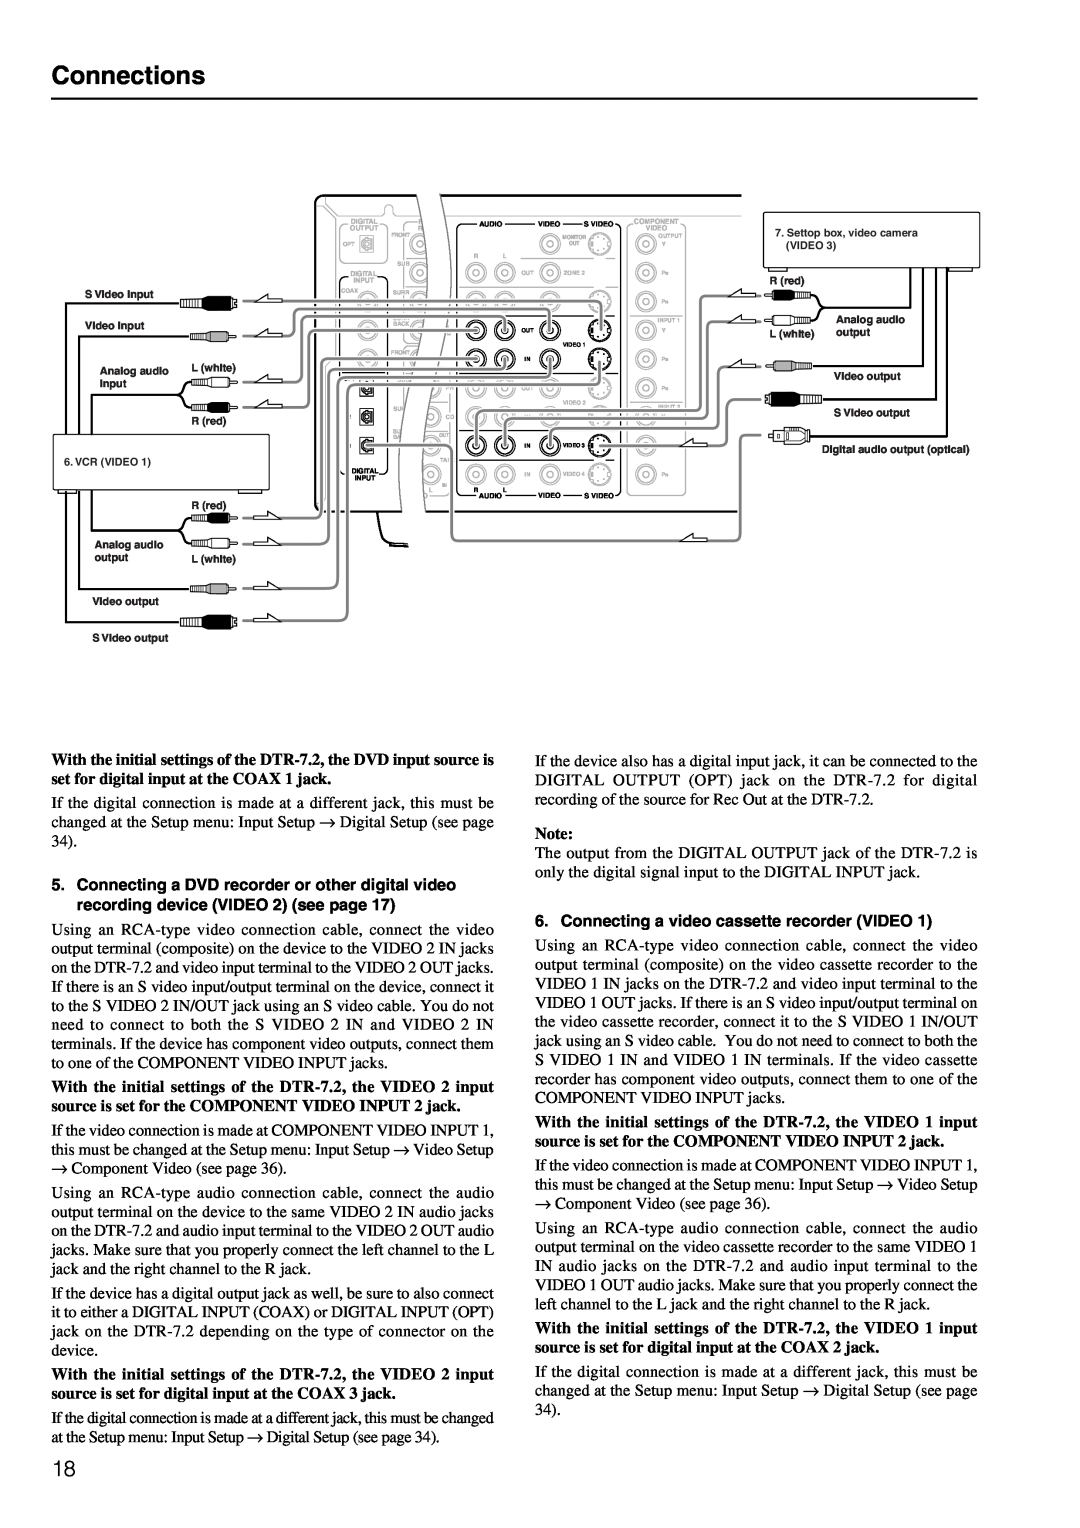 Integra DTR-7.2 instruction manual Connections, Connecting a video cassette recorder VIDEO 